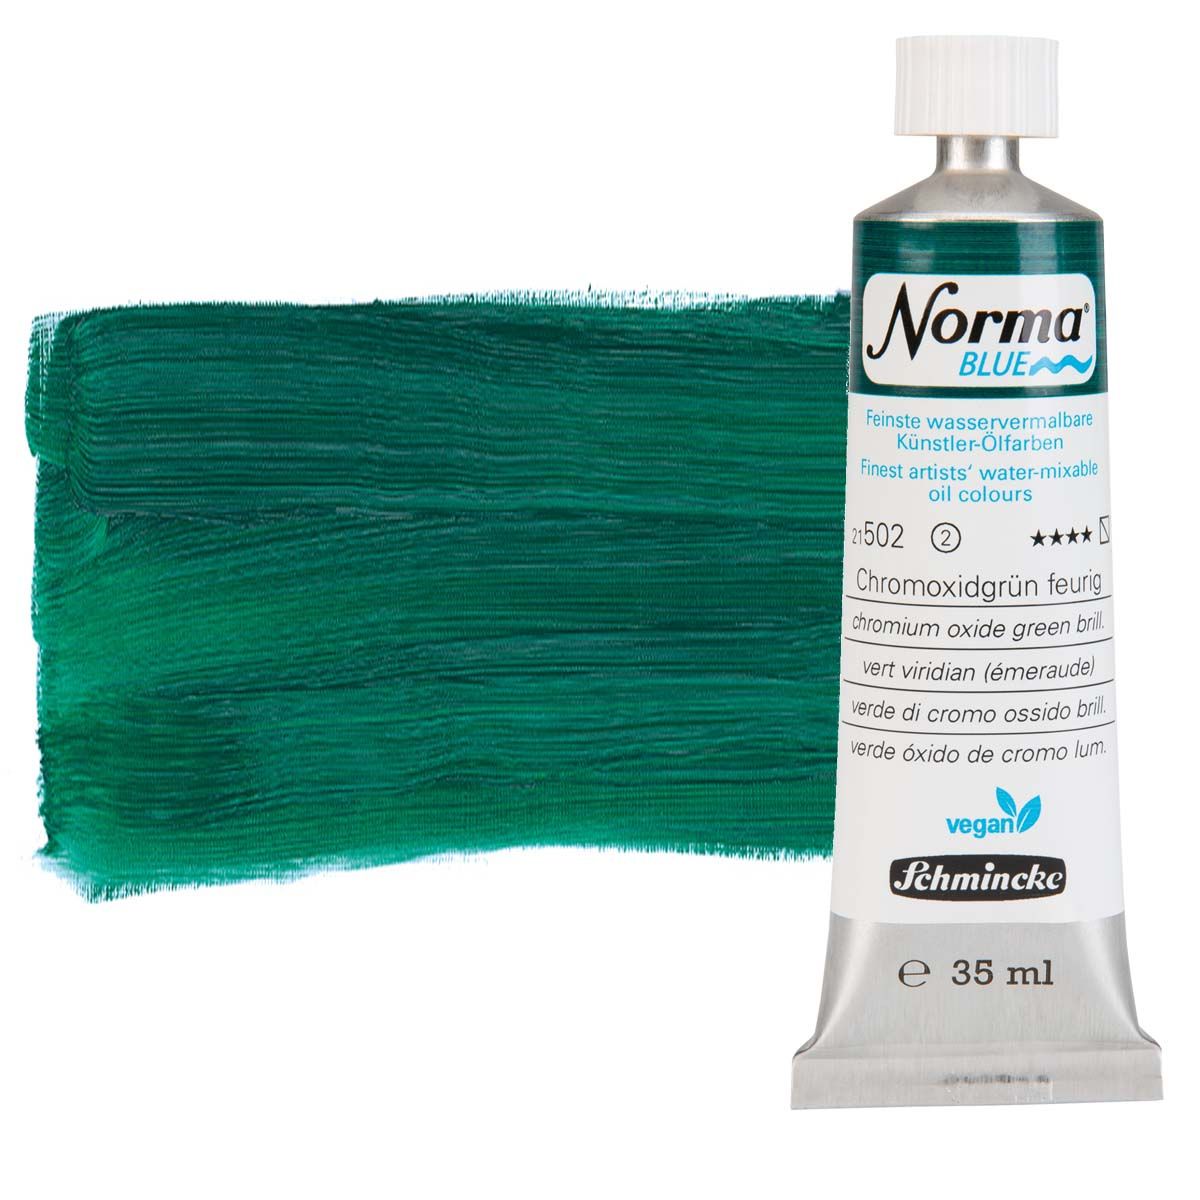 Norma Blue Water-Mixable Oil Color - Chromium Green Oxide Brilliant, 35ml Tube